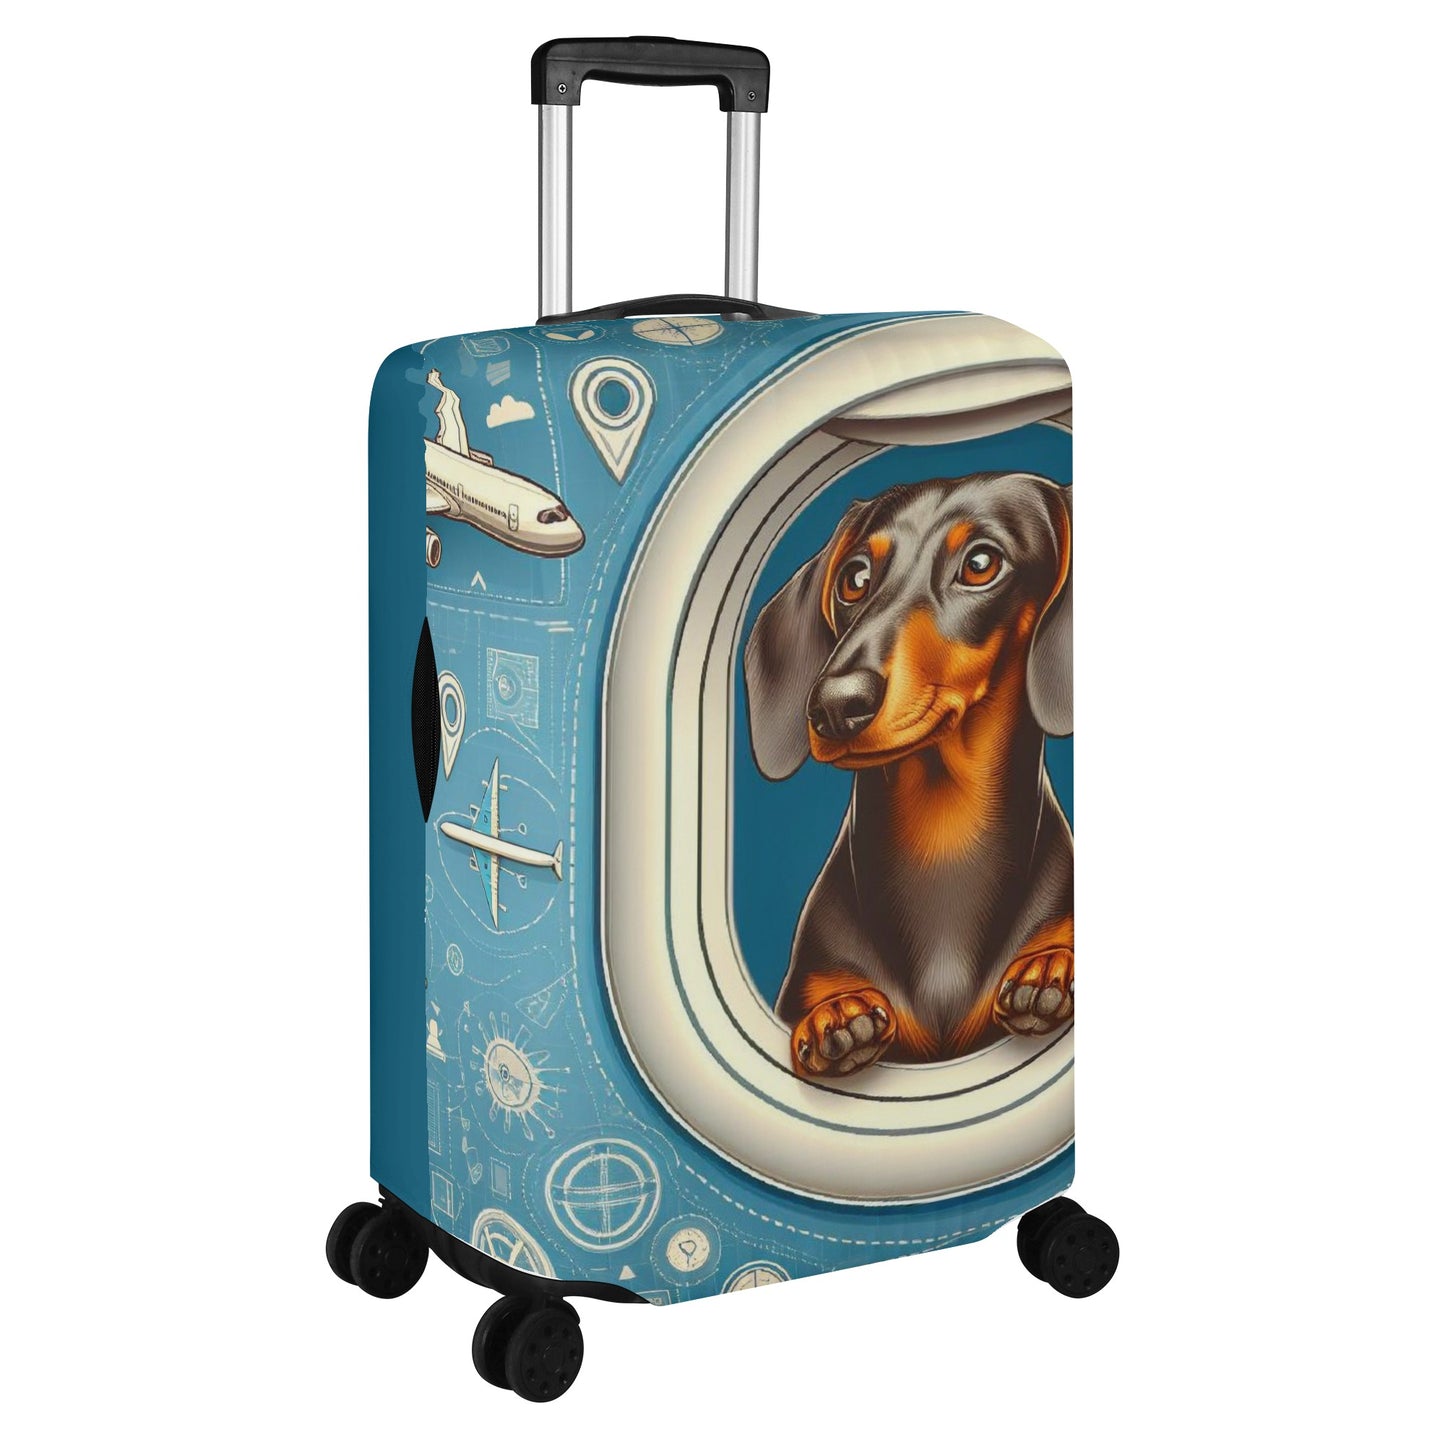 Ivan - Luggage Cover